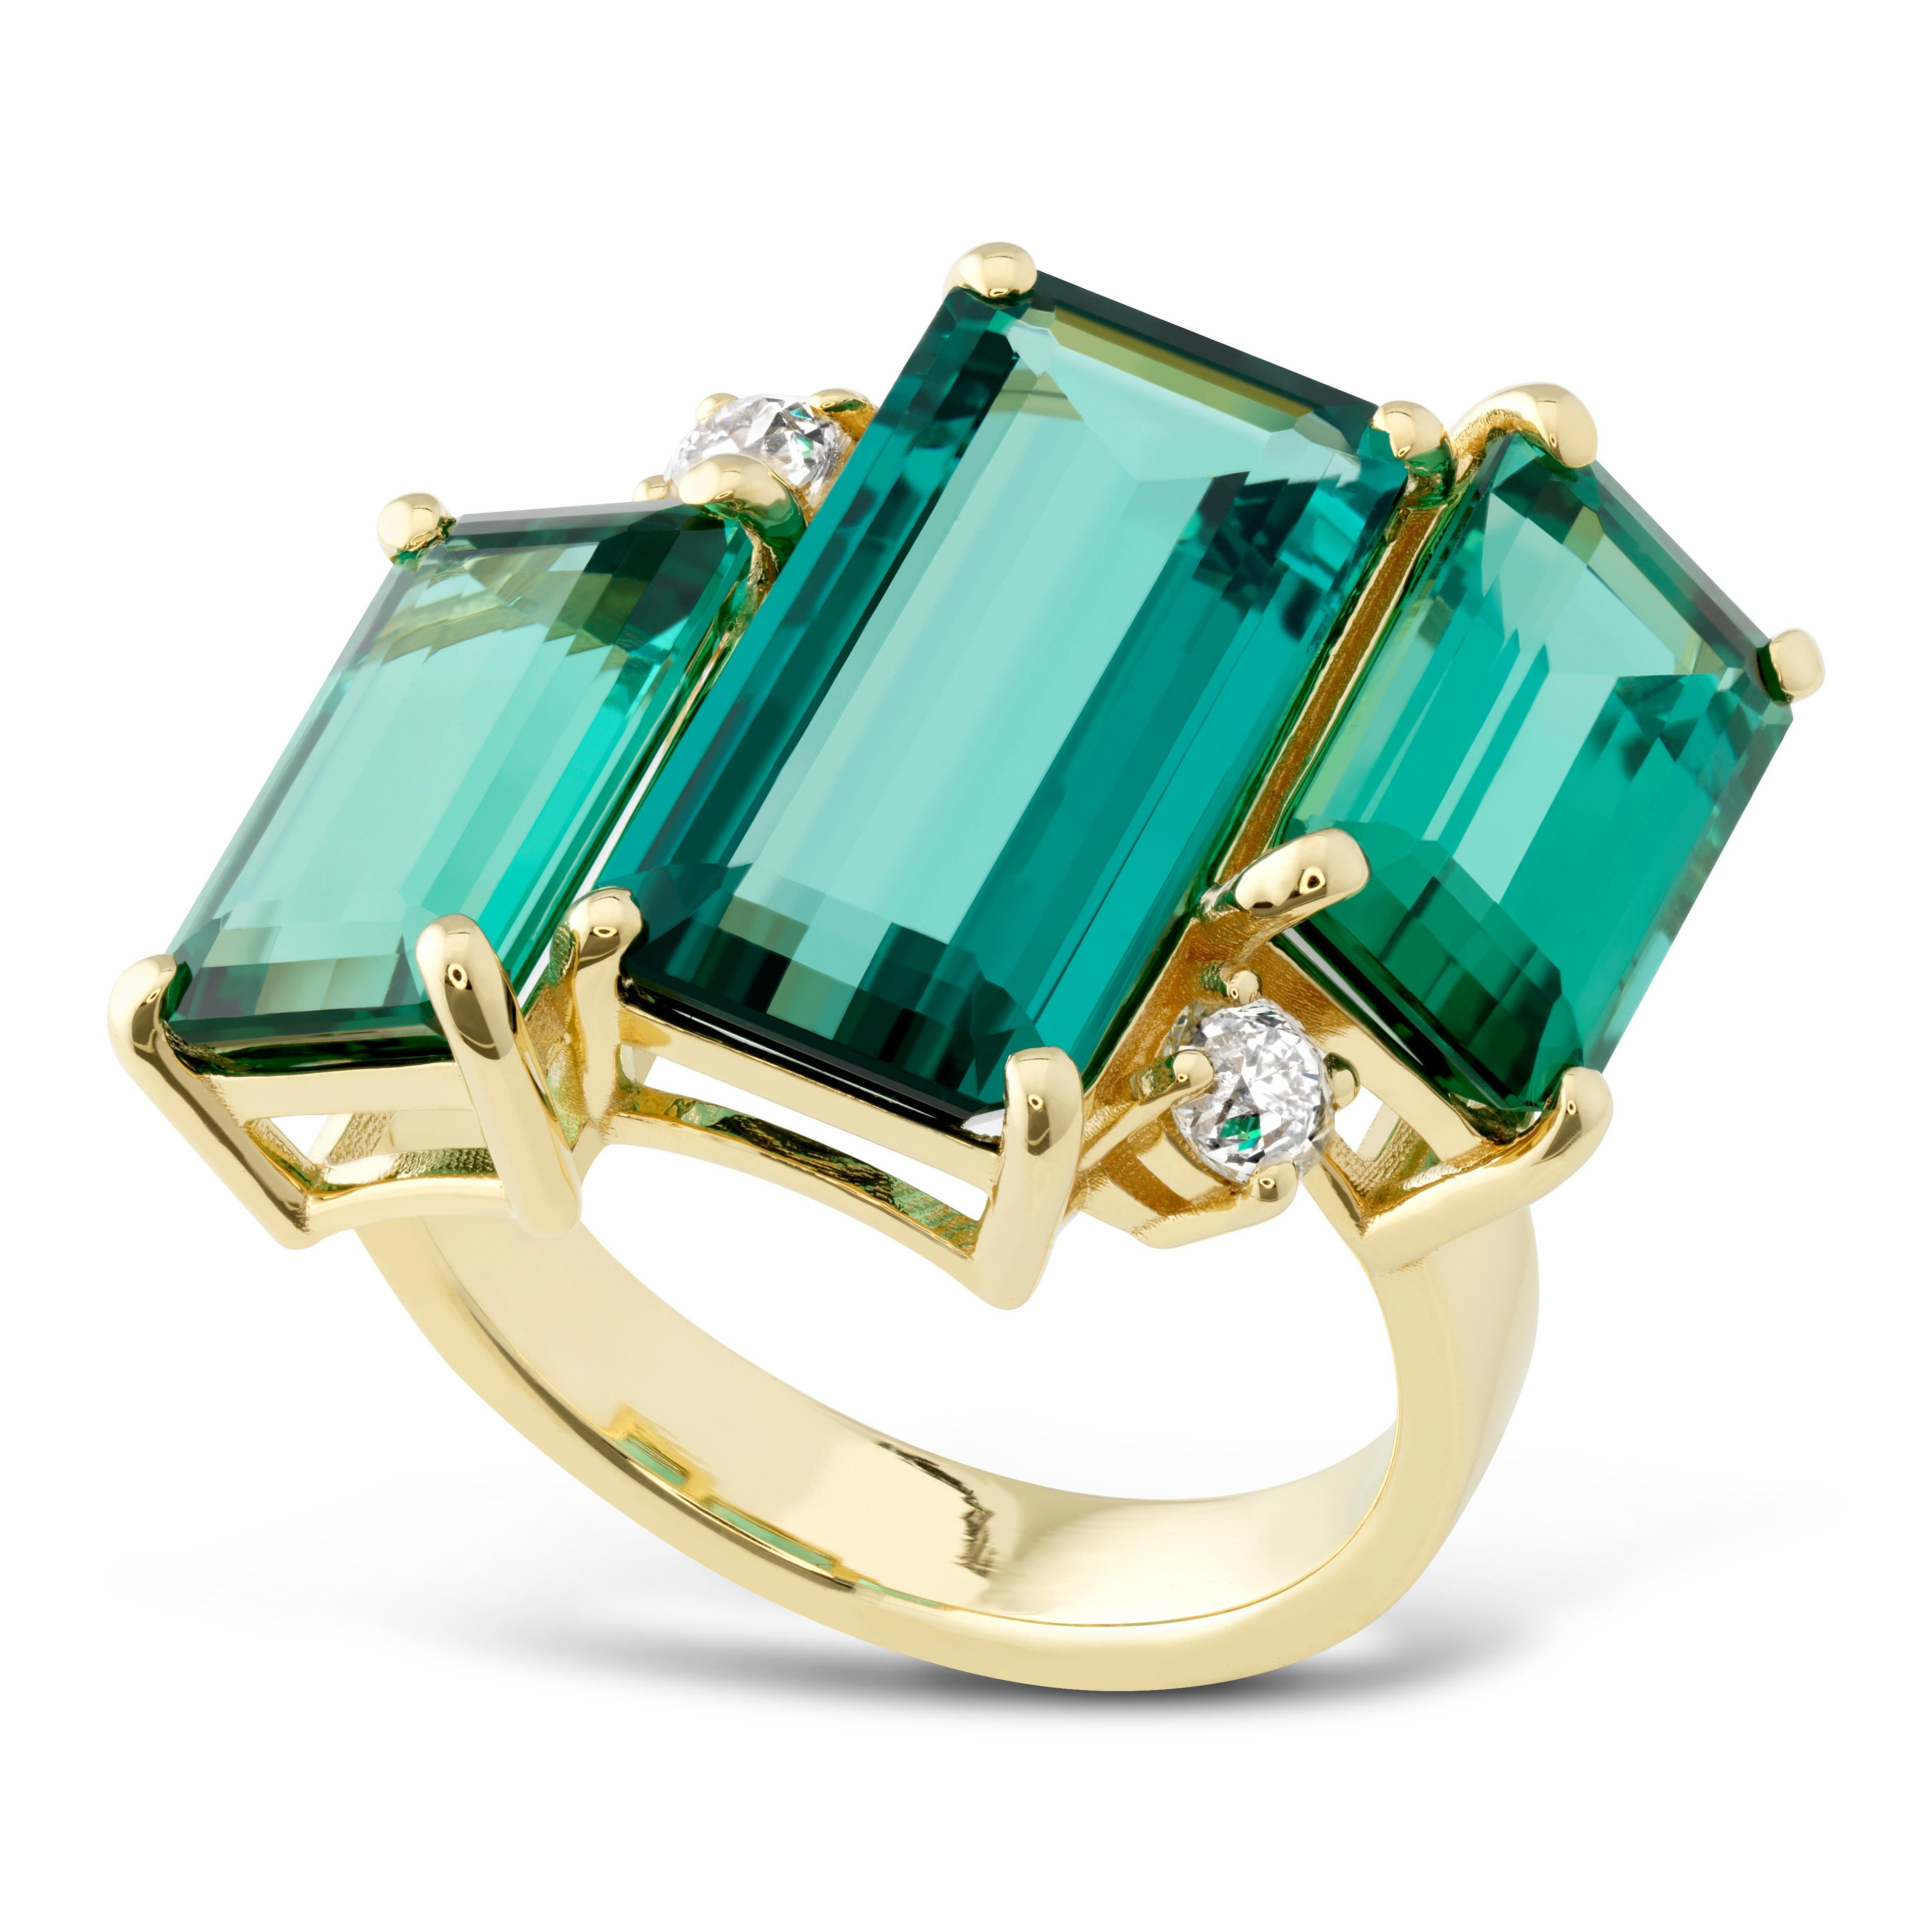 Cocktail ring set with 11.06 total carats of exceptional blue green tourmaline set with .32ct of diamonds in 18k yellow gold.  This ring sparkles at every turn.   The three step cut tourmalines are crystal clear with beautiful light refraction.  